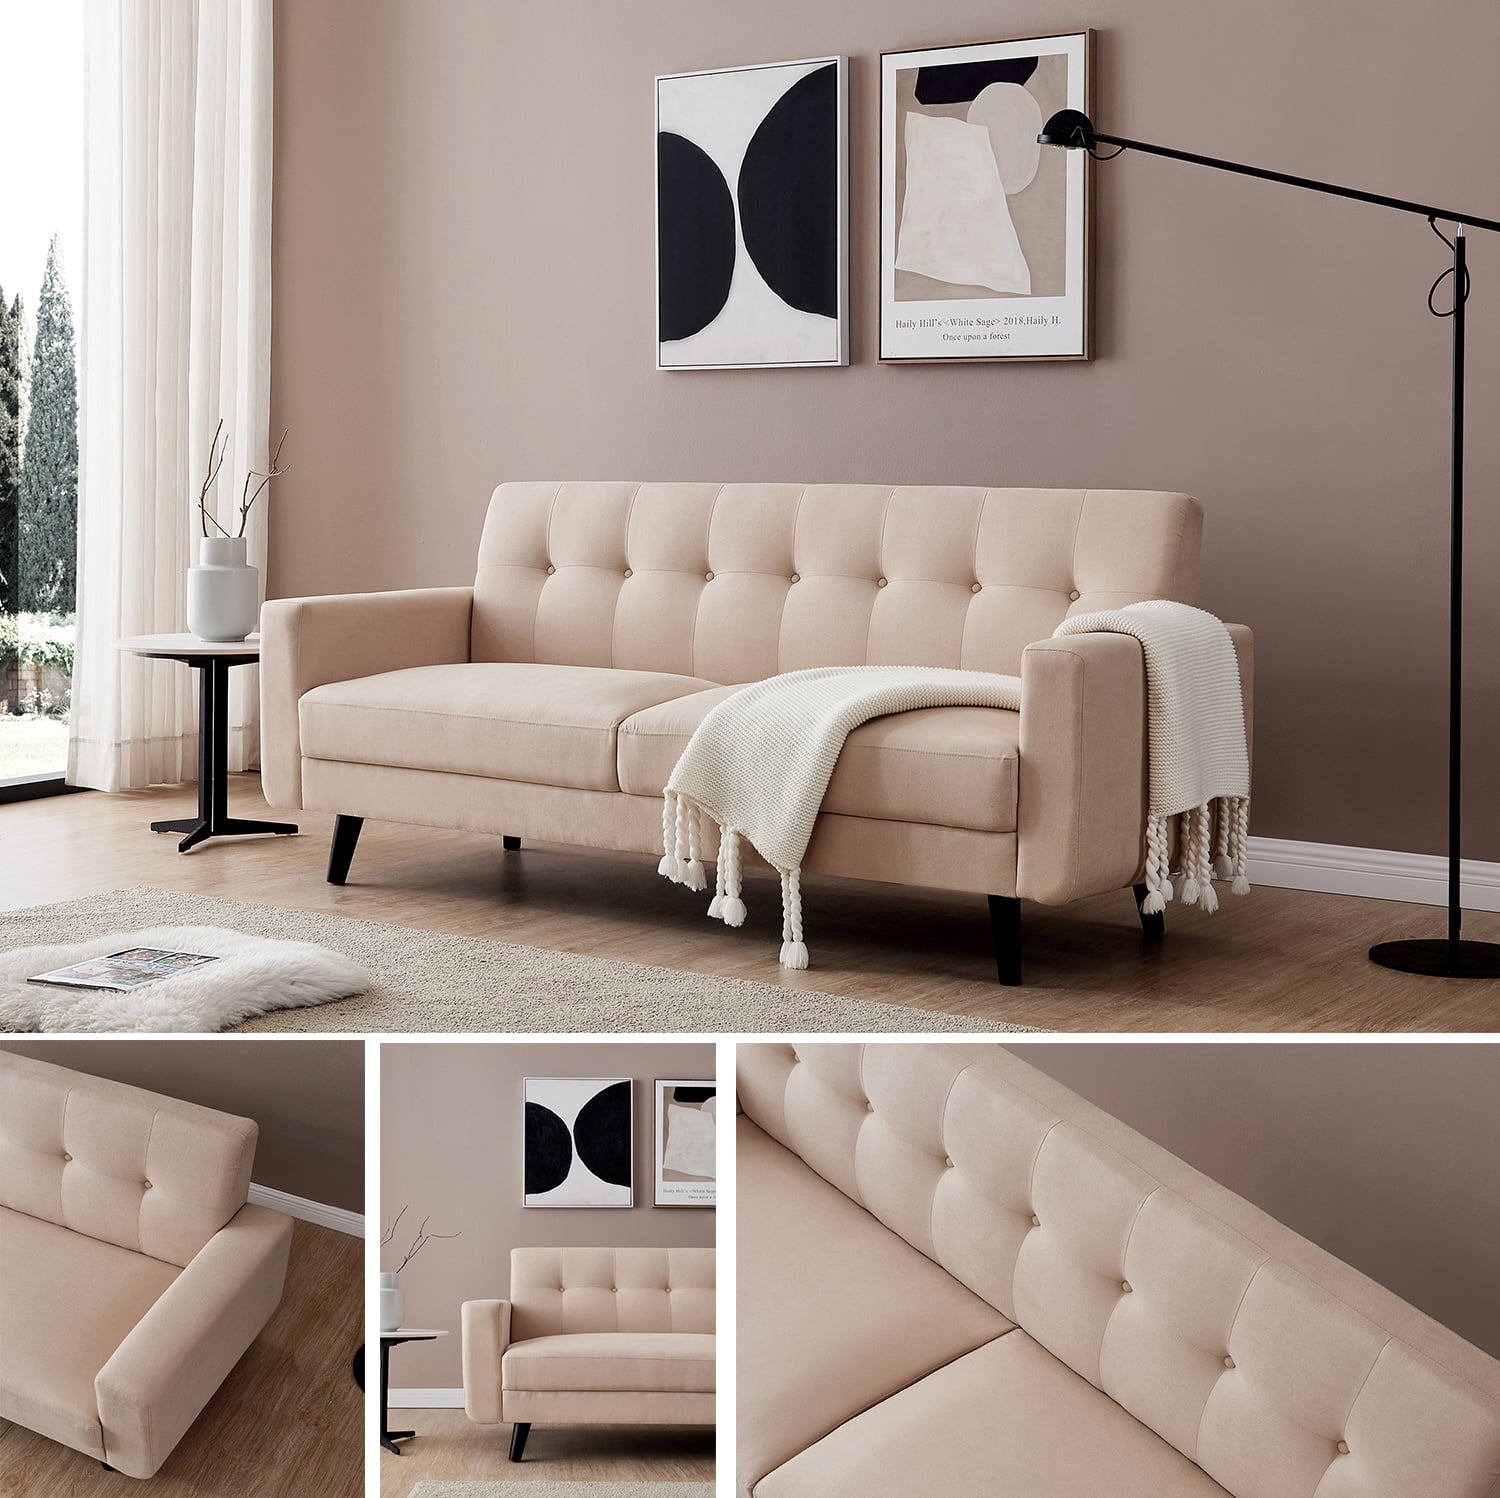 Upholstered Sofas For Living Room Modern Design Couch Soft Fabric